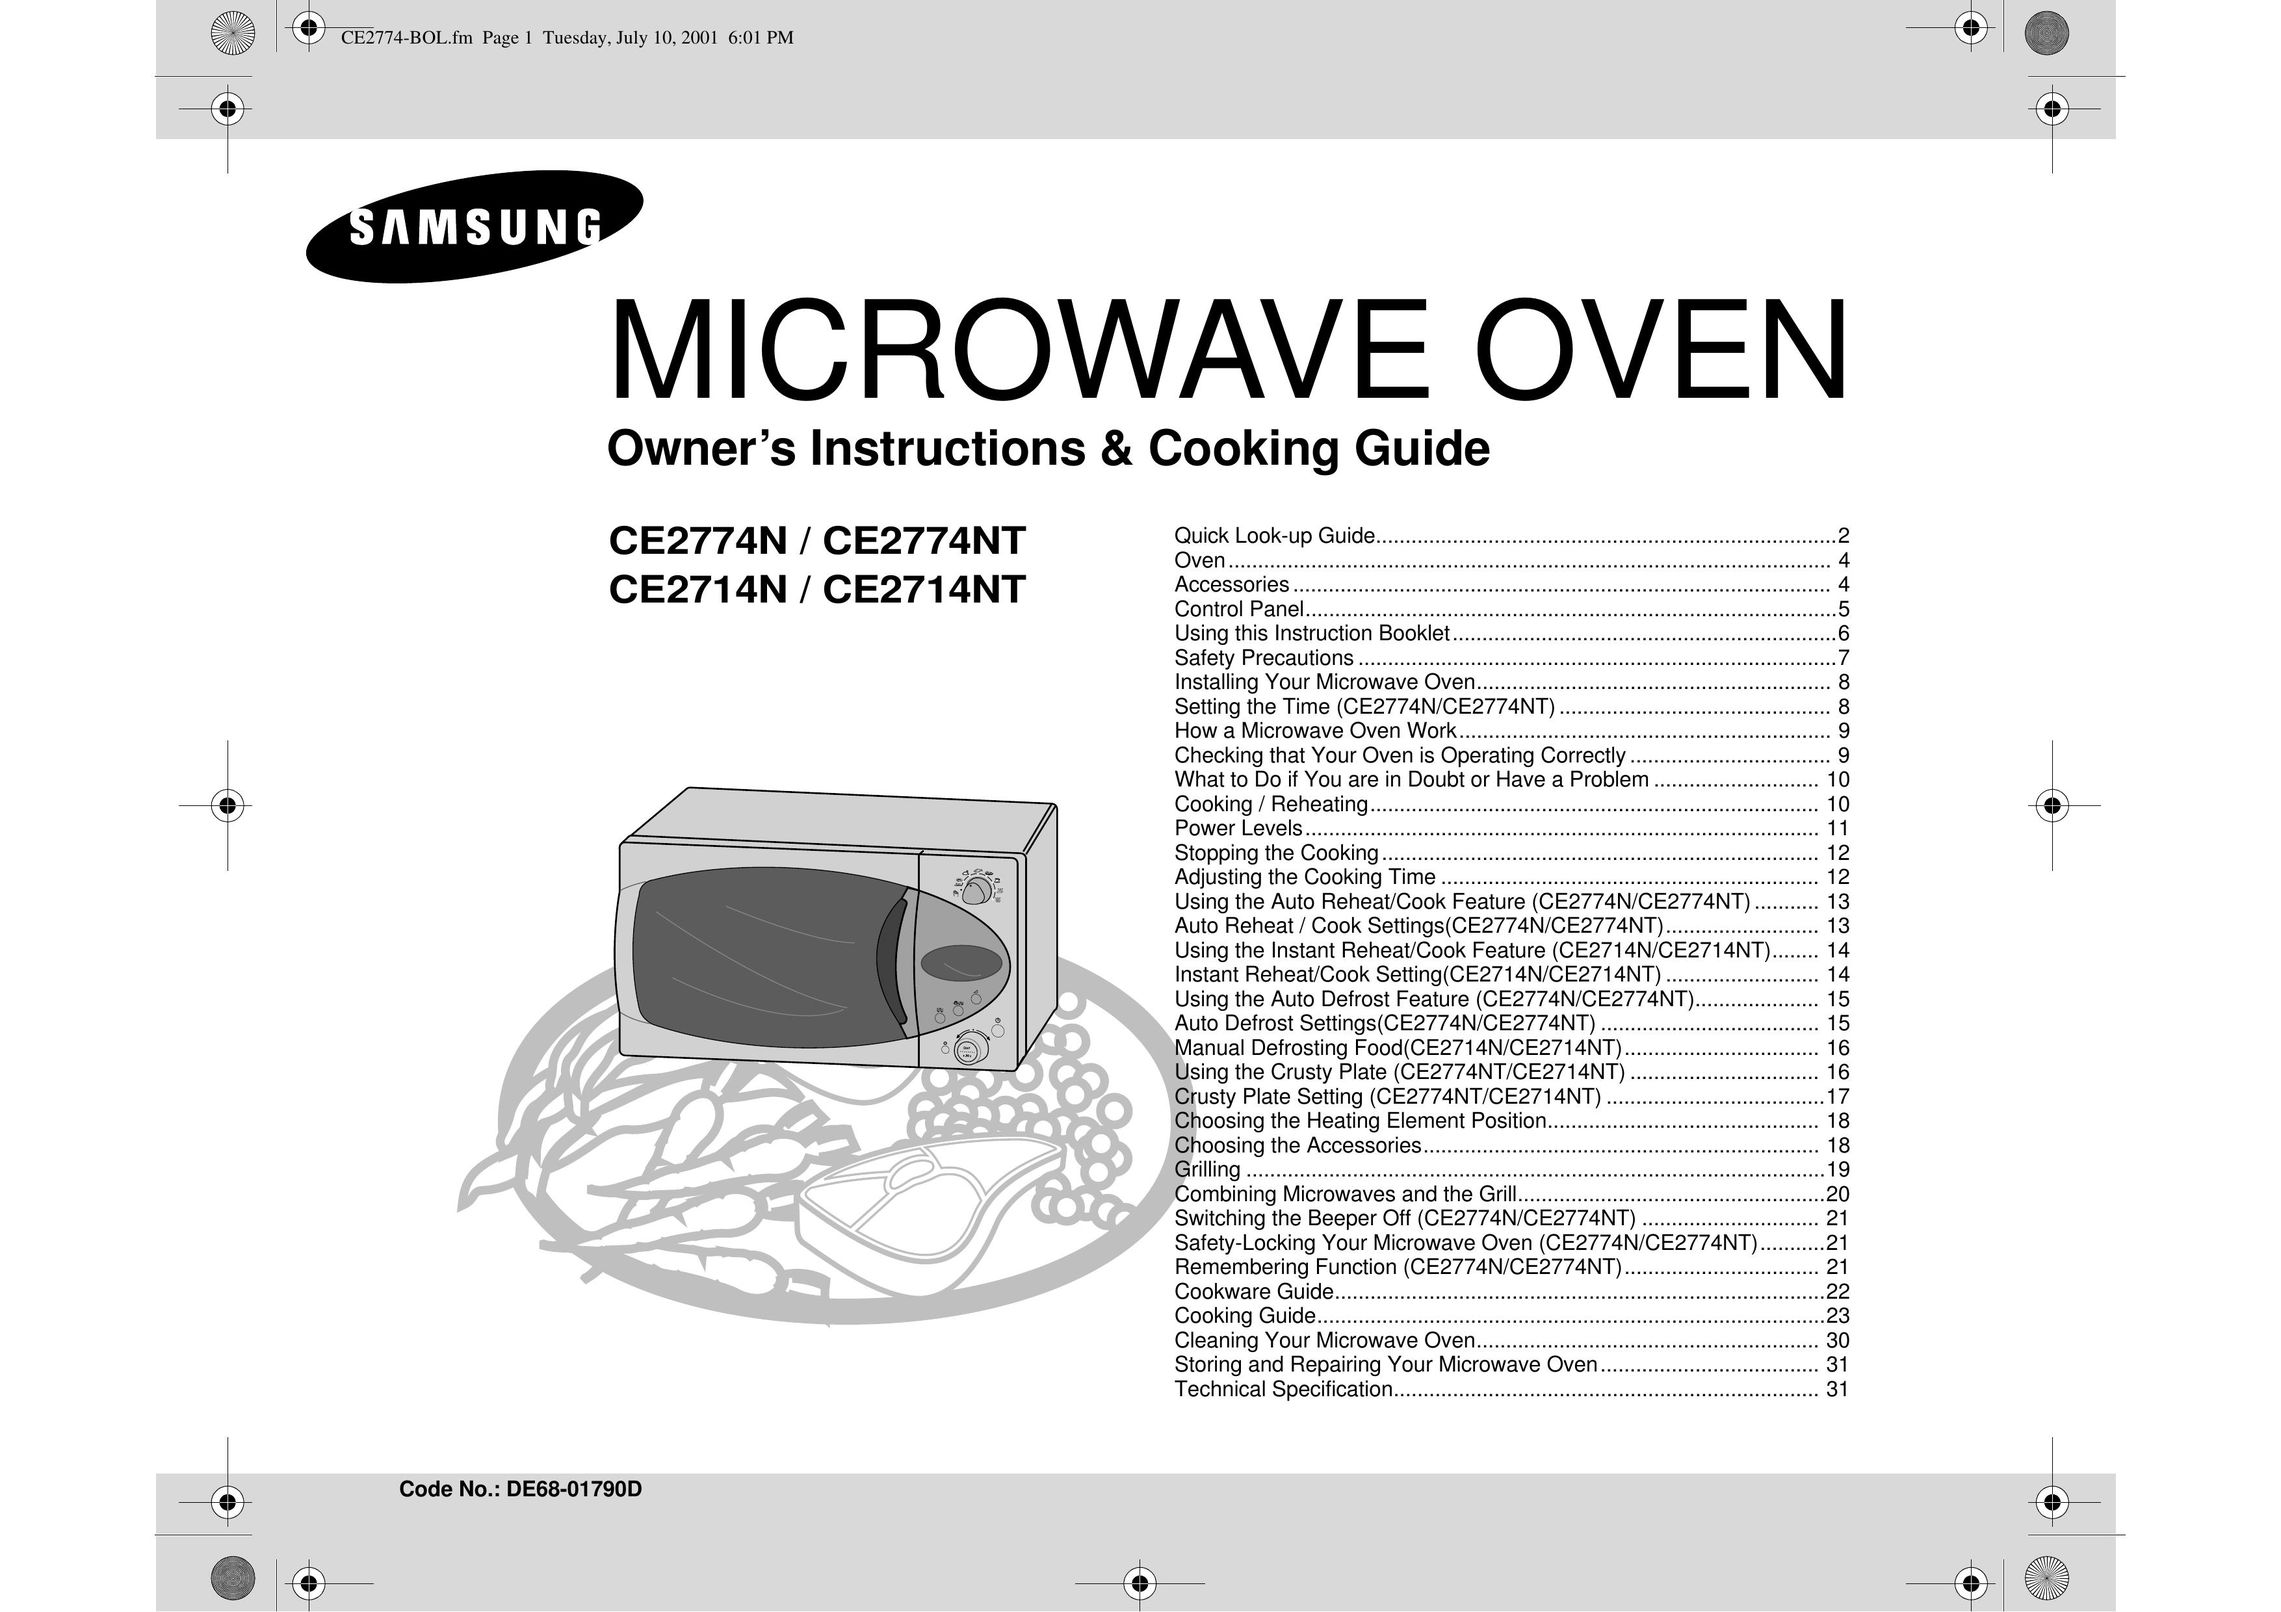 Samsung CE2774N Microwave Oven User Manual